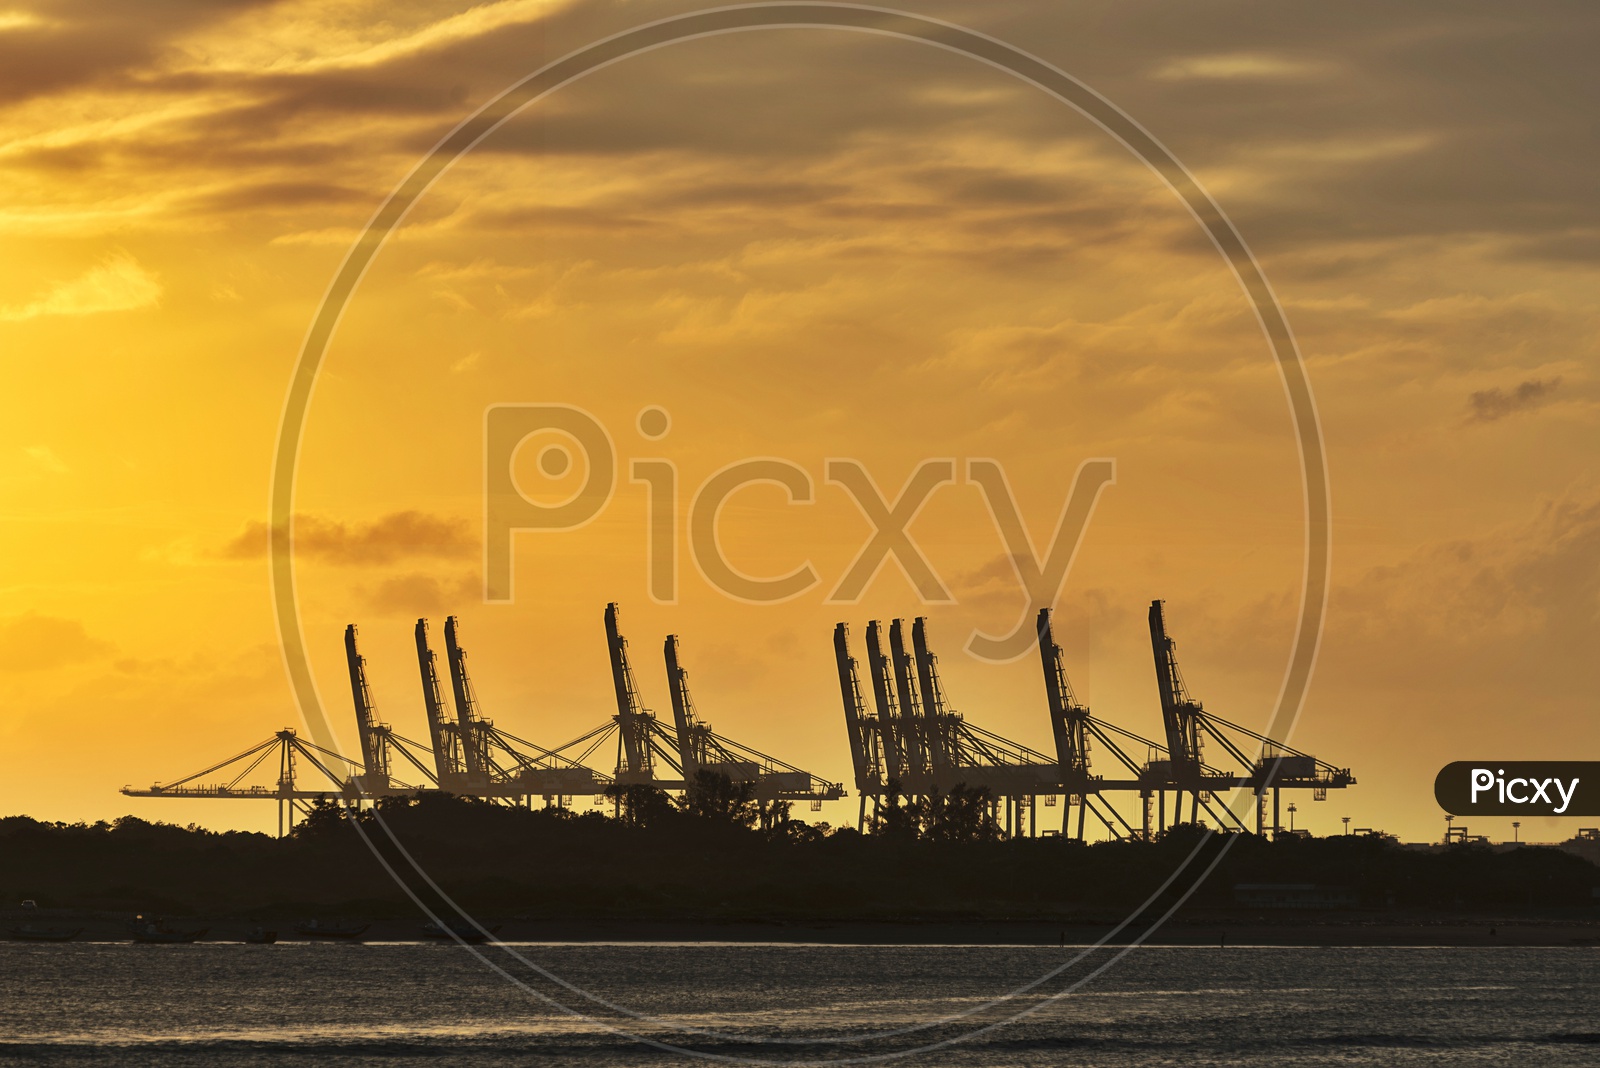 Heavy Cranes Silhouette In a Port or Harbor With Sunset Sky in Background